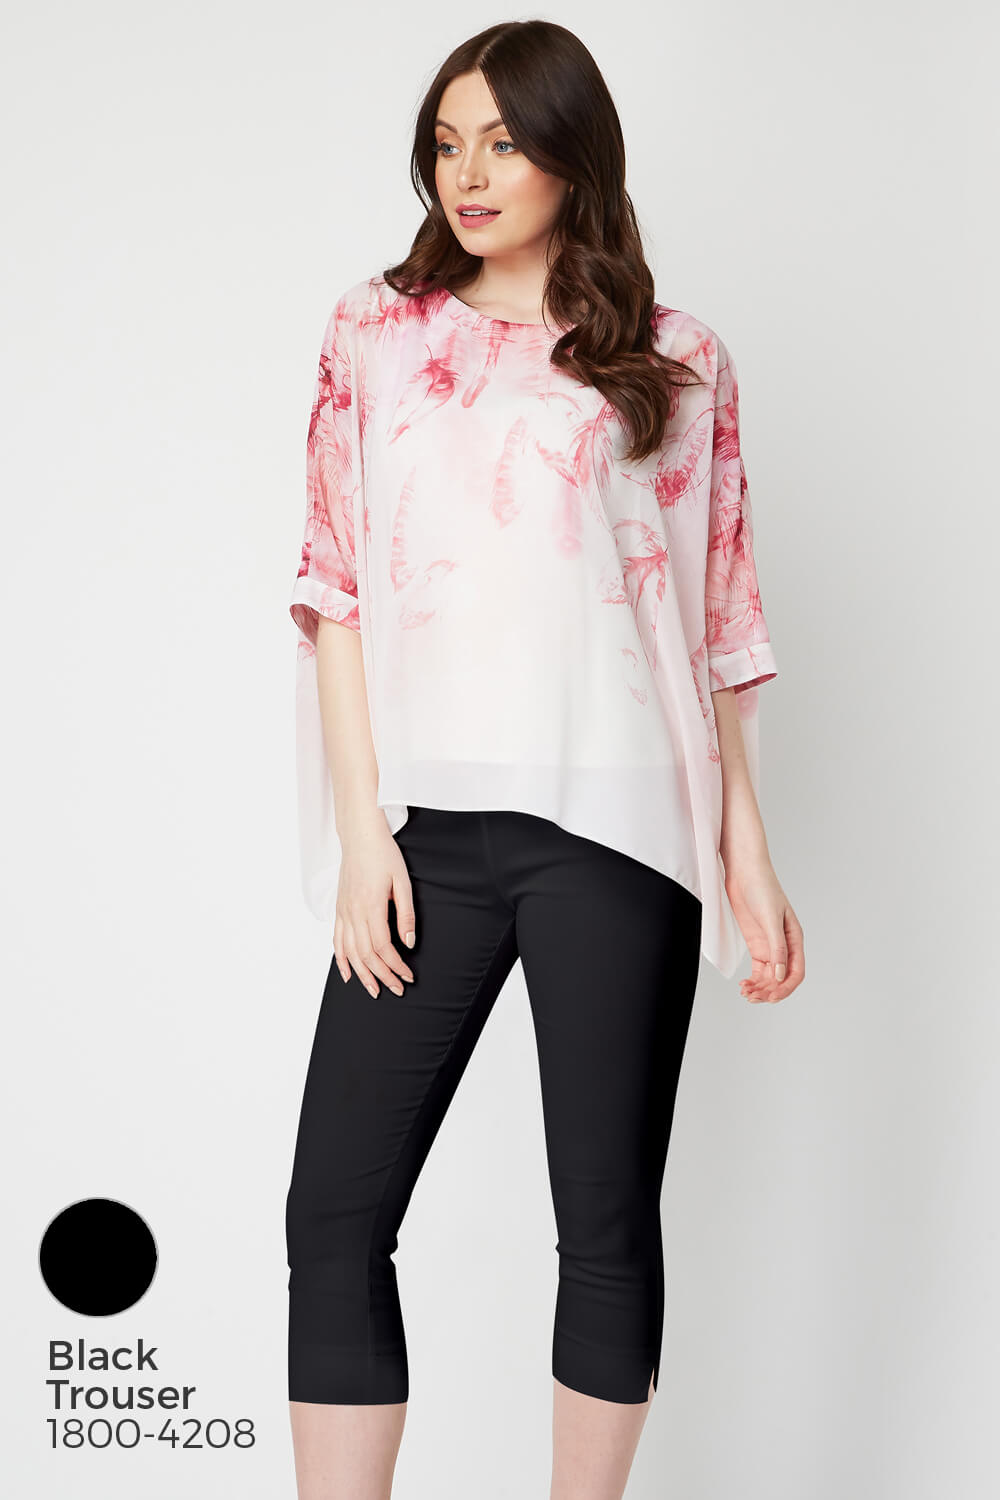 PINK Feather Border Print Overlay Top, Image 7 of 8